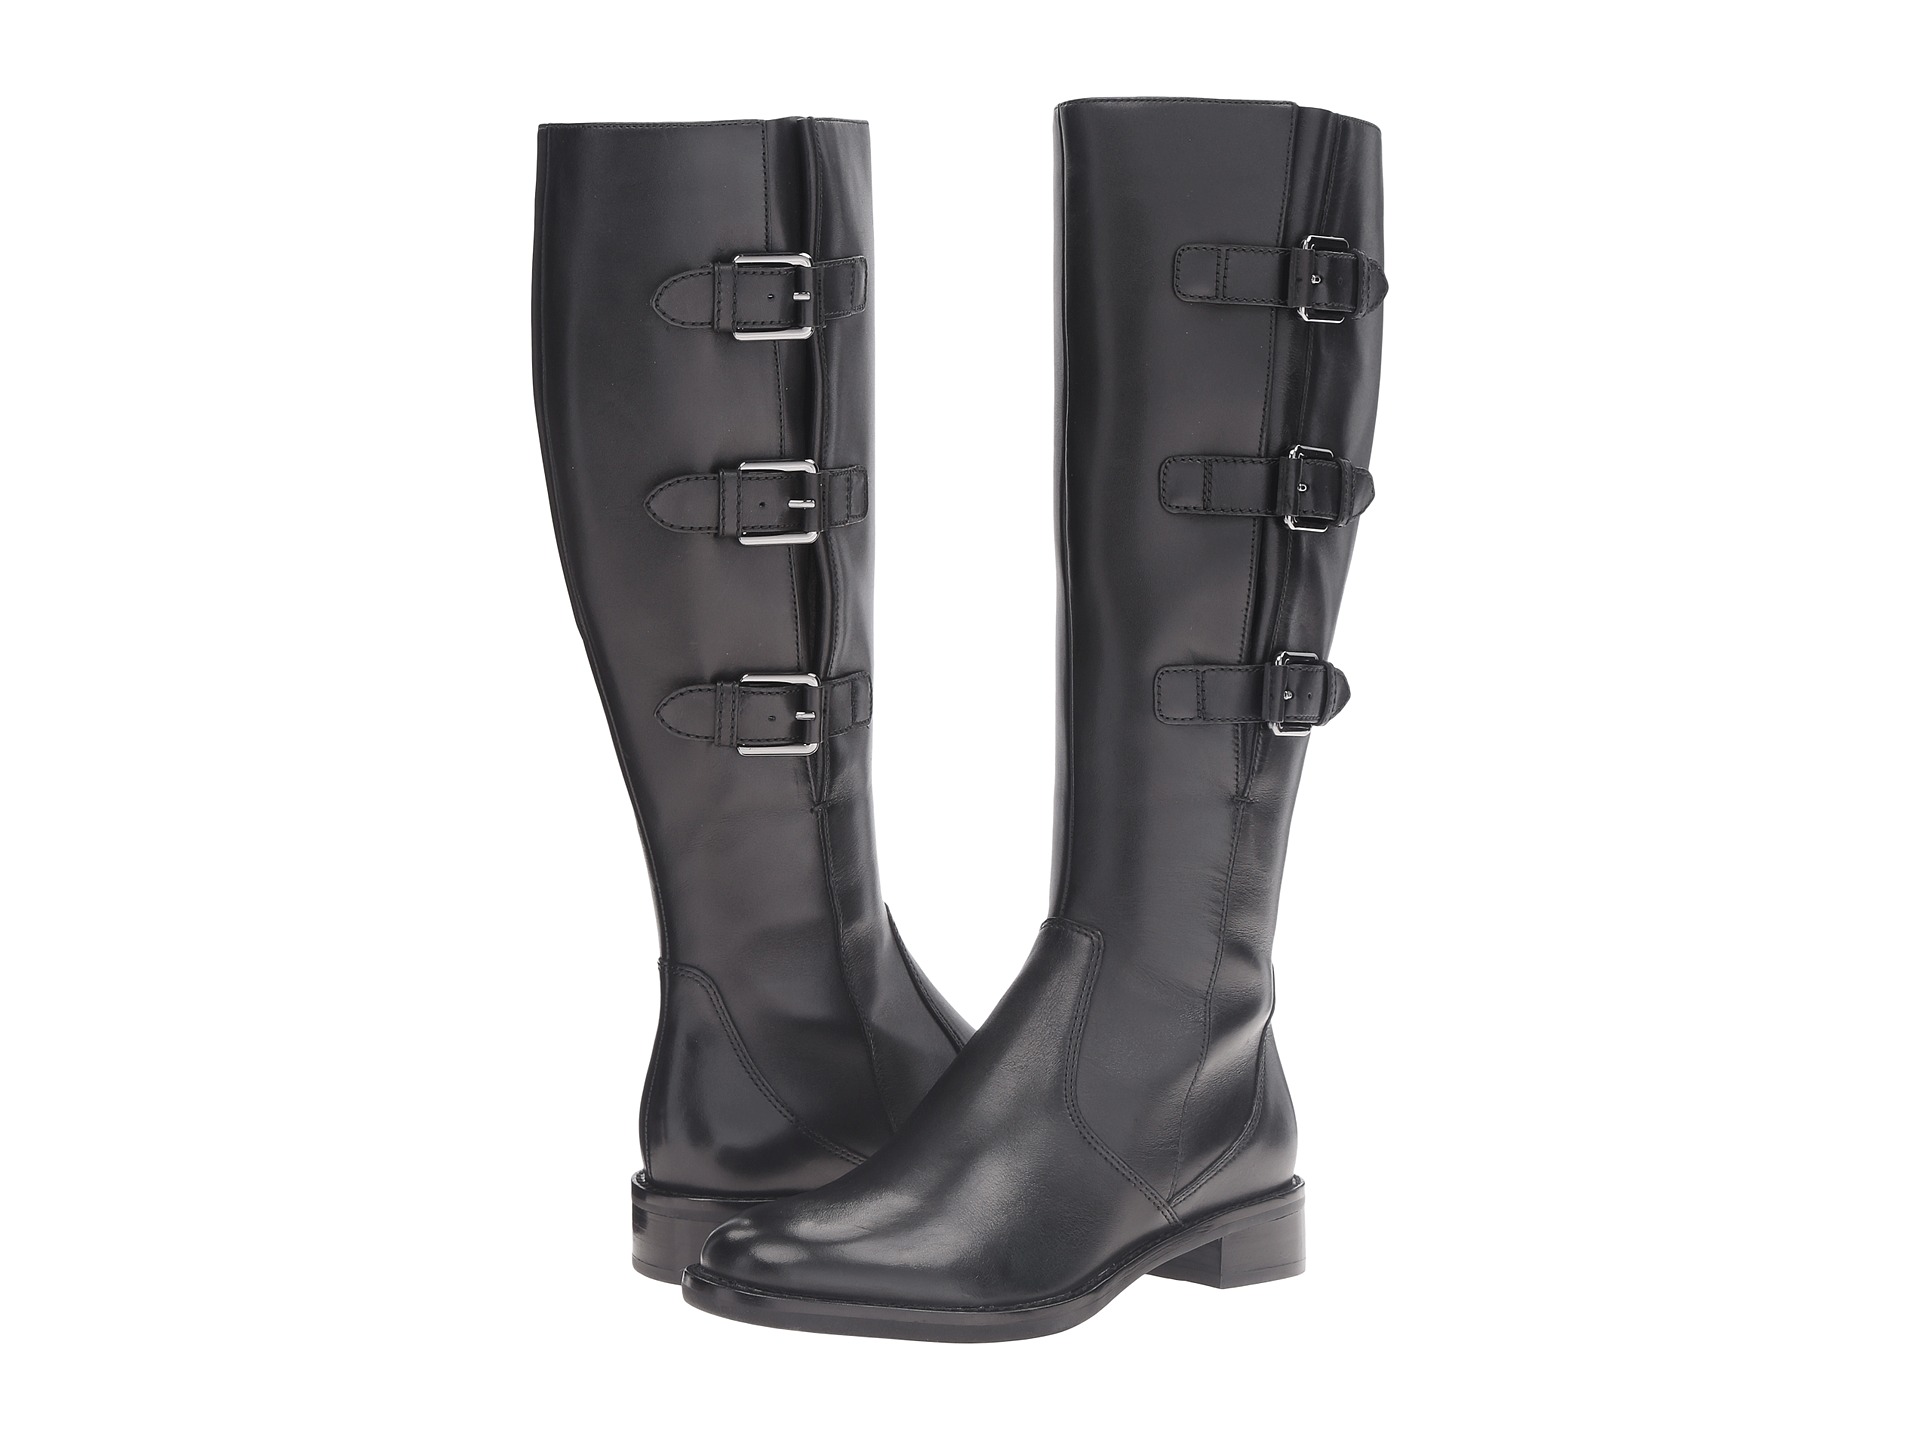 ECCO Hobart Buckle 25 MM Boot Black Cow Leather - Zappos.com Free ...